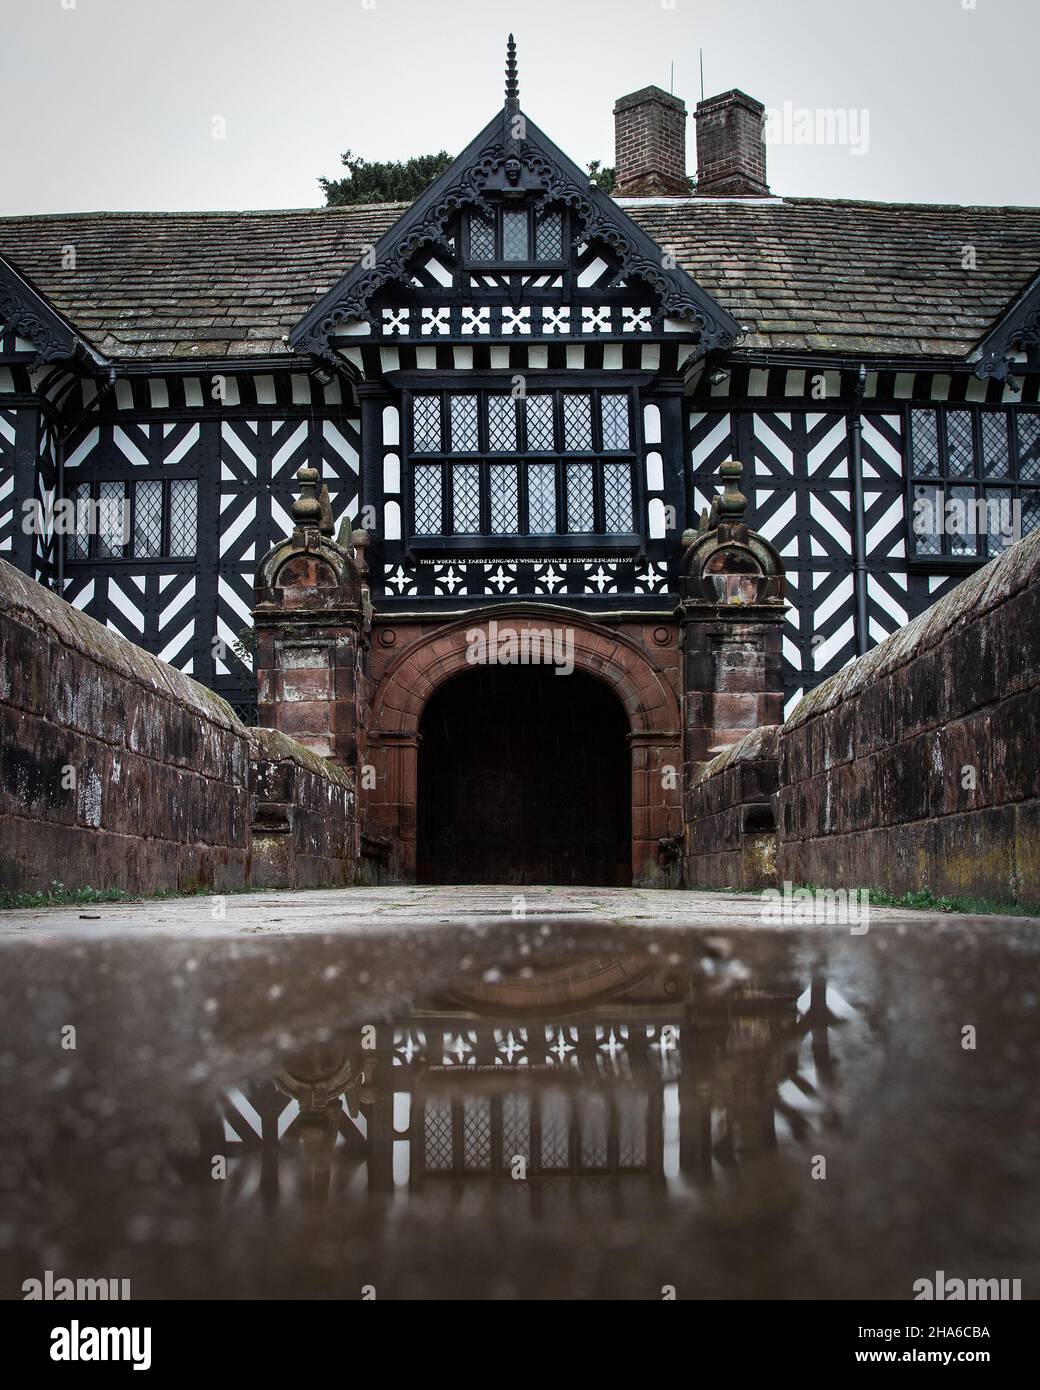 The reflection from a puddle capturing the tudor facade. Speke Hall is a wood-framed wattle-and-daub Tudor manor house in Speke, Liverpool, England. Stock Photo